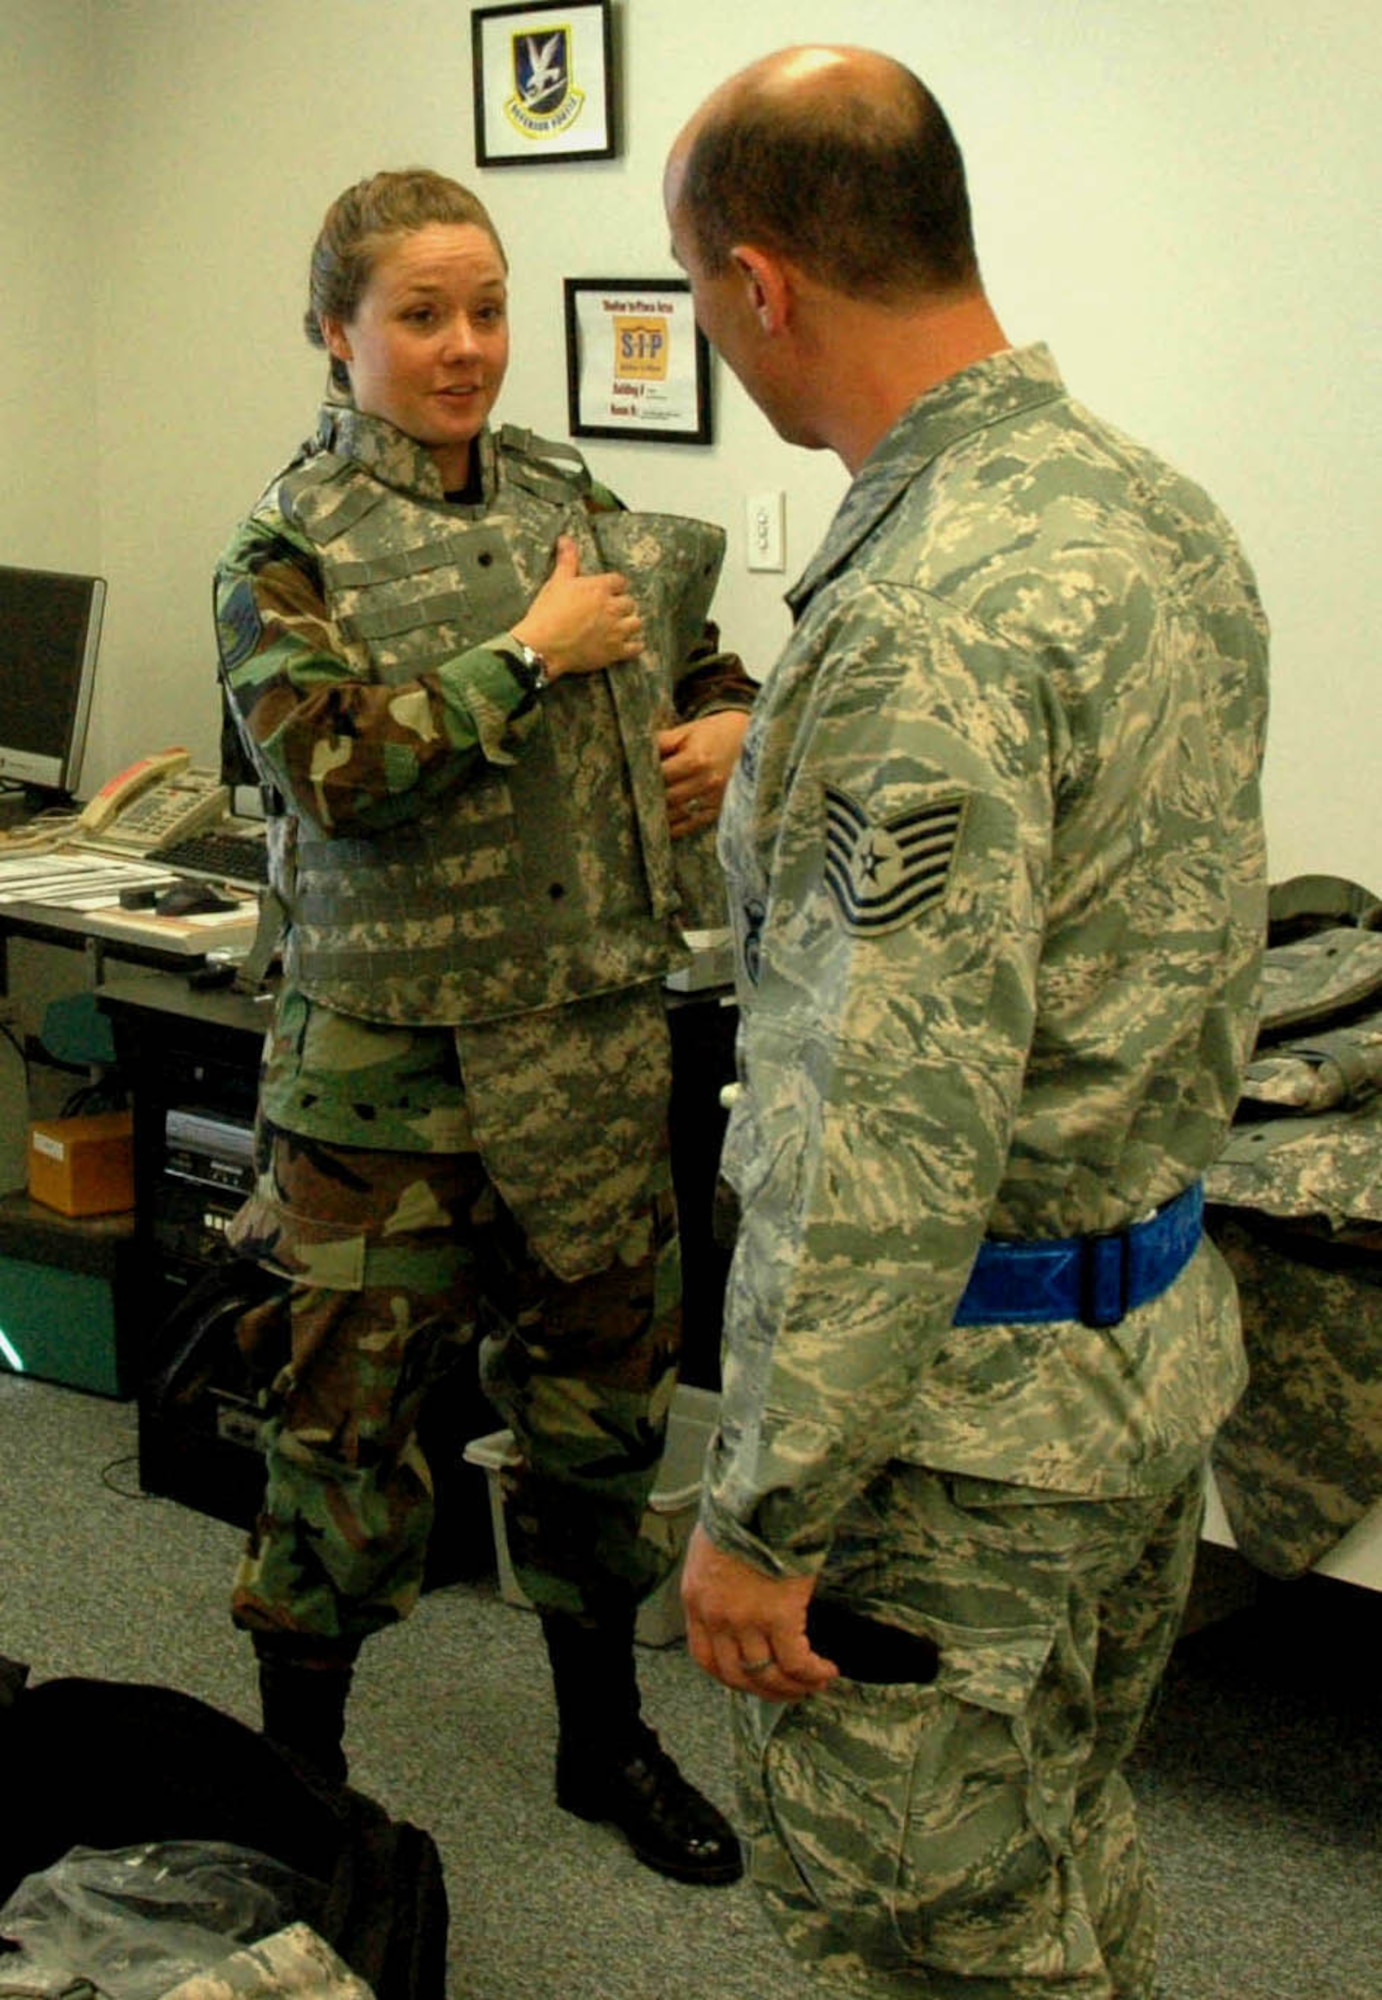 MCCHORD AIR FORCE BASE, Wash.- Tech. Sgt. Vanessa Walsh, left, 446th Security Forces Squadron here, tests out a new bulletproof vest as she and fellow security forces teammate, Tech. Sgt. Ric Shumate, examine a new shipment of equipment in the 446th SFS training room here, Sept. 12. When not serving in the Air Force Reserve, Sergeant Walsh teaches sixth grade students in the Bethel School District in Spanaway, Wash. (U.S. Air Force photo/Staff Sgt. Nicole Celestine). 